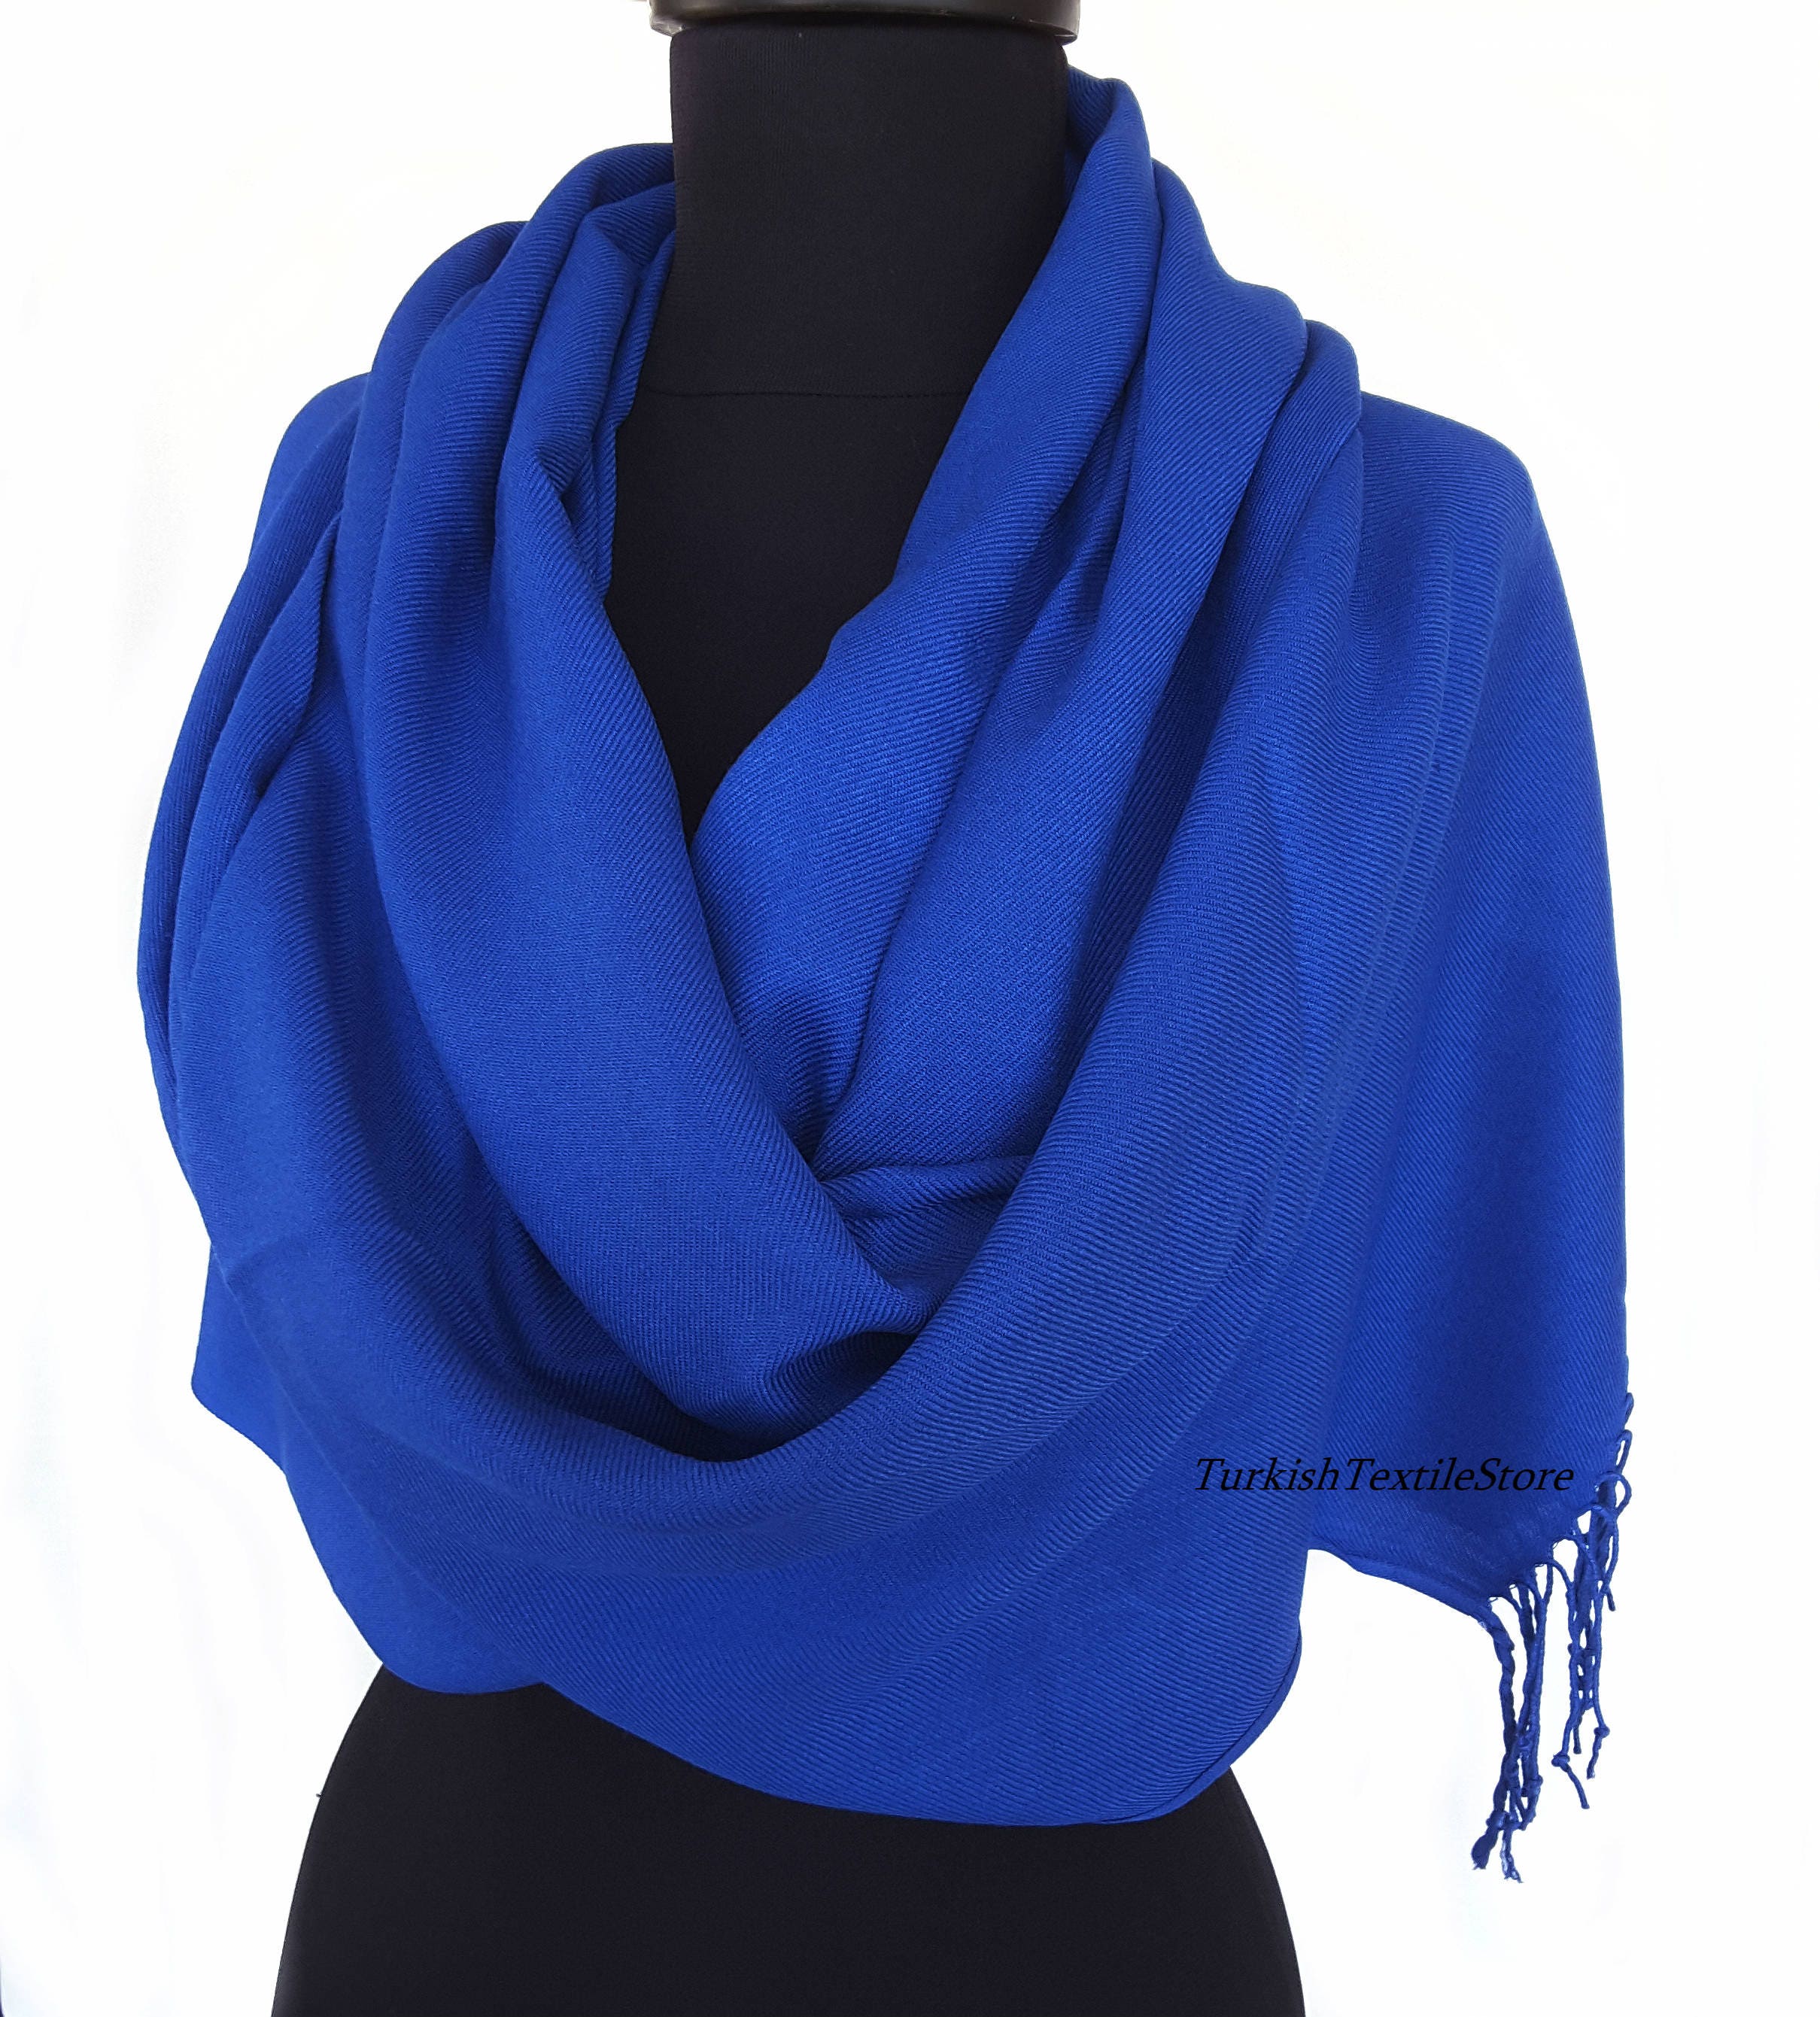 Biagio 100% Wool Pashmina Solid Scarf ROYAL BLUE Color Womens Shawl Wrap  Scarve